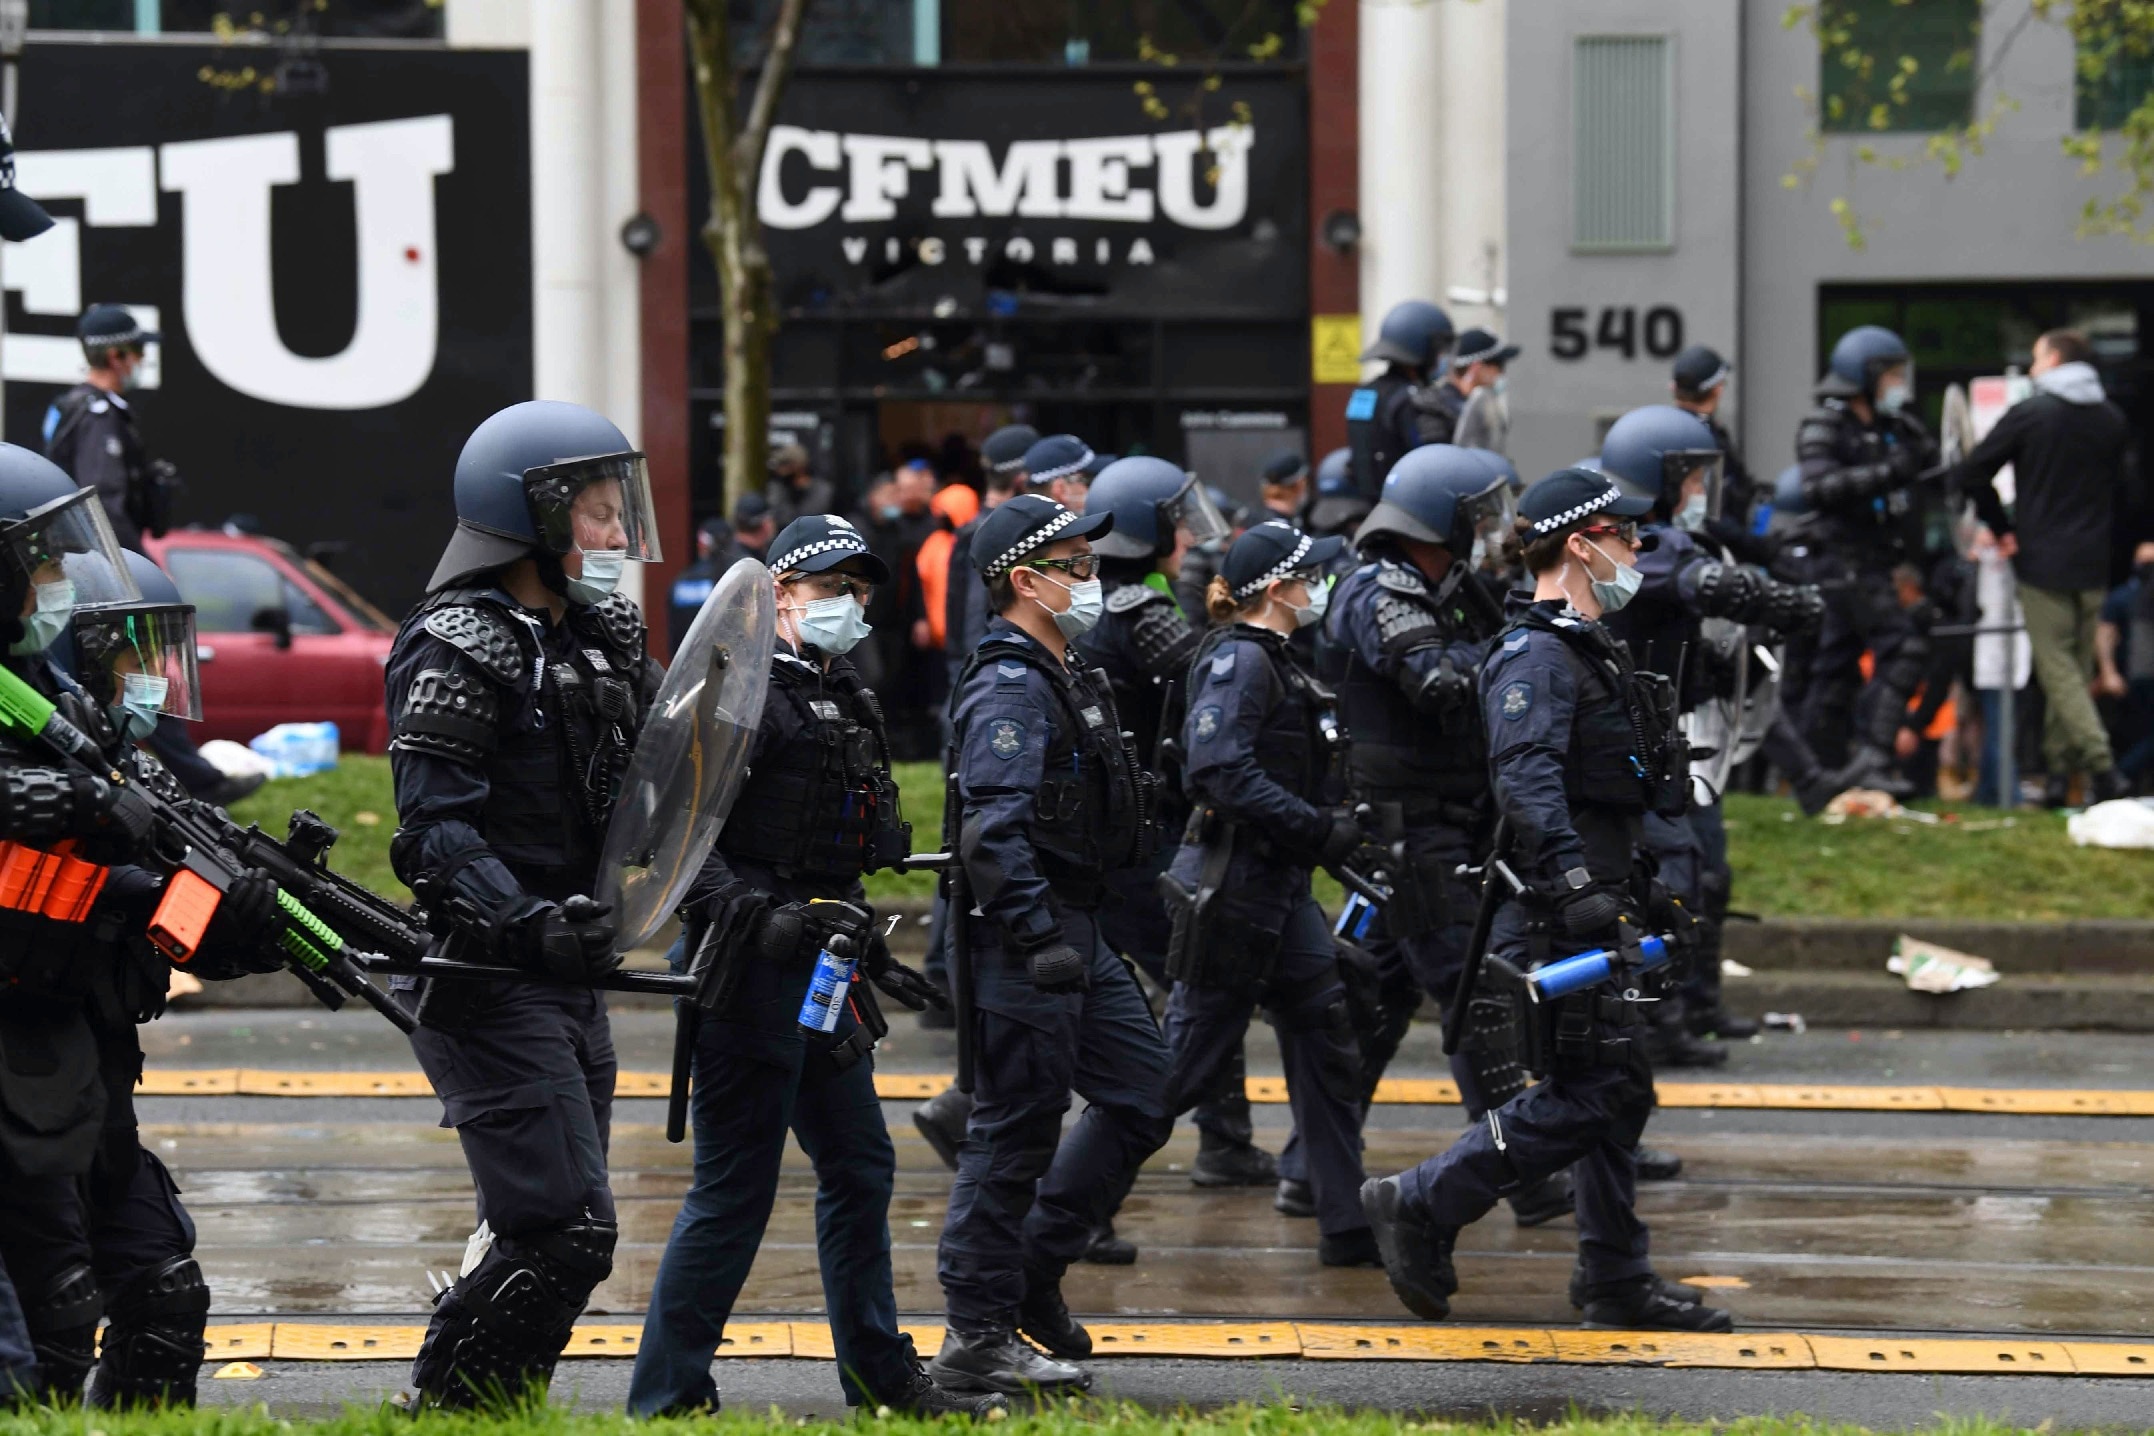 Police in riot gear are seen at a protest at CFMEU headquarters in Melbourne.